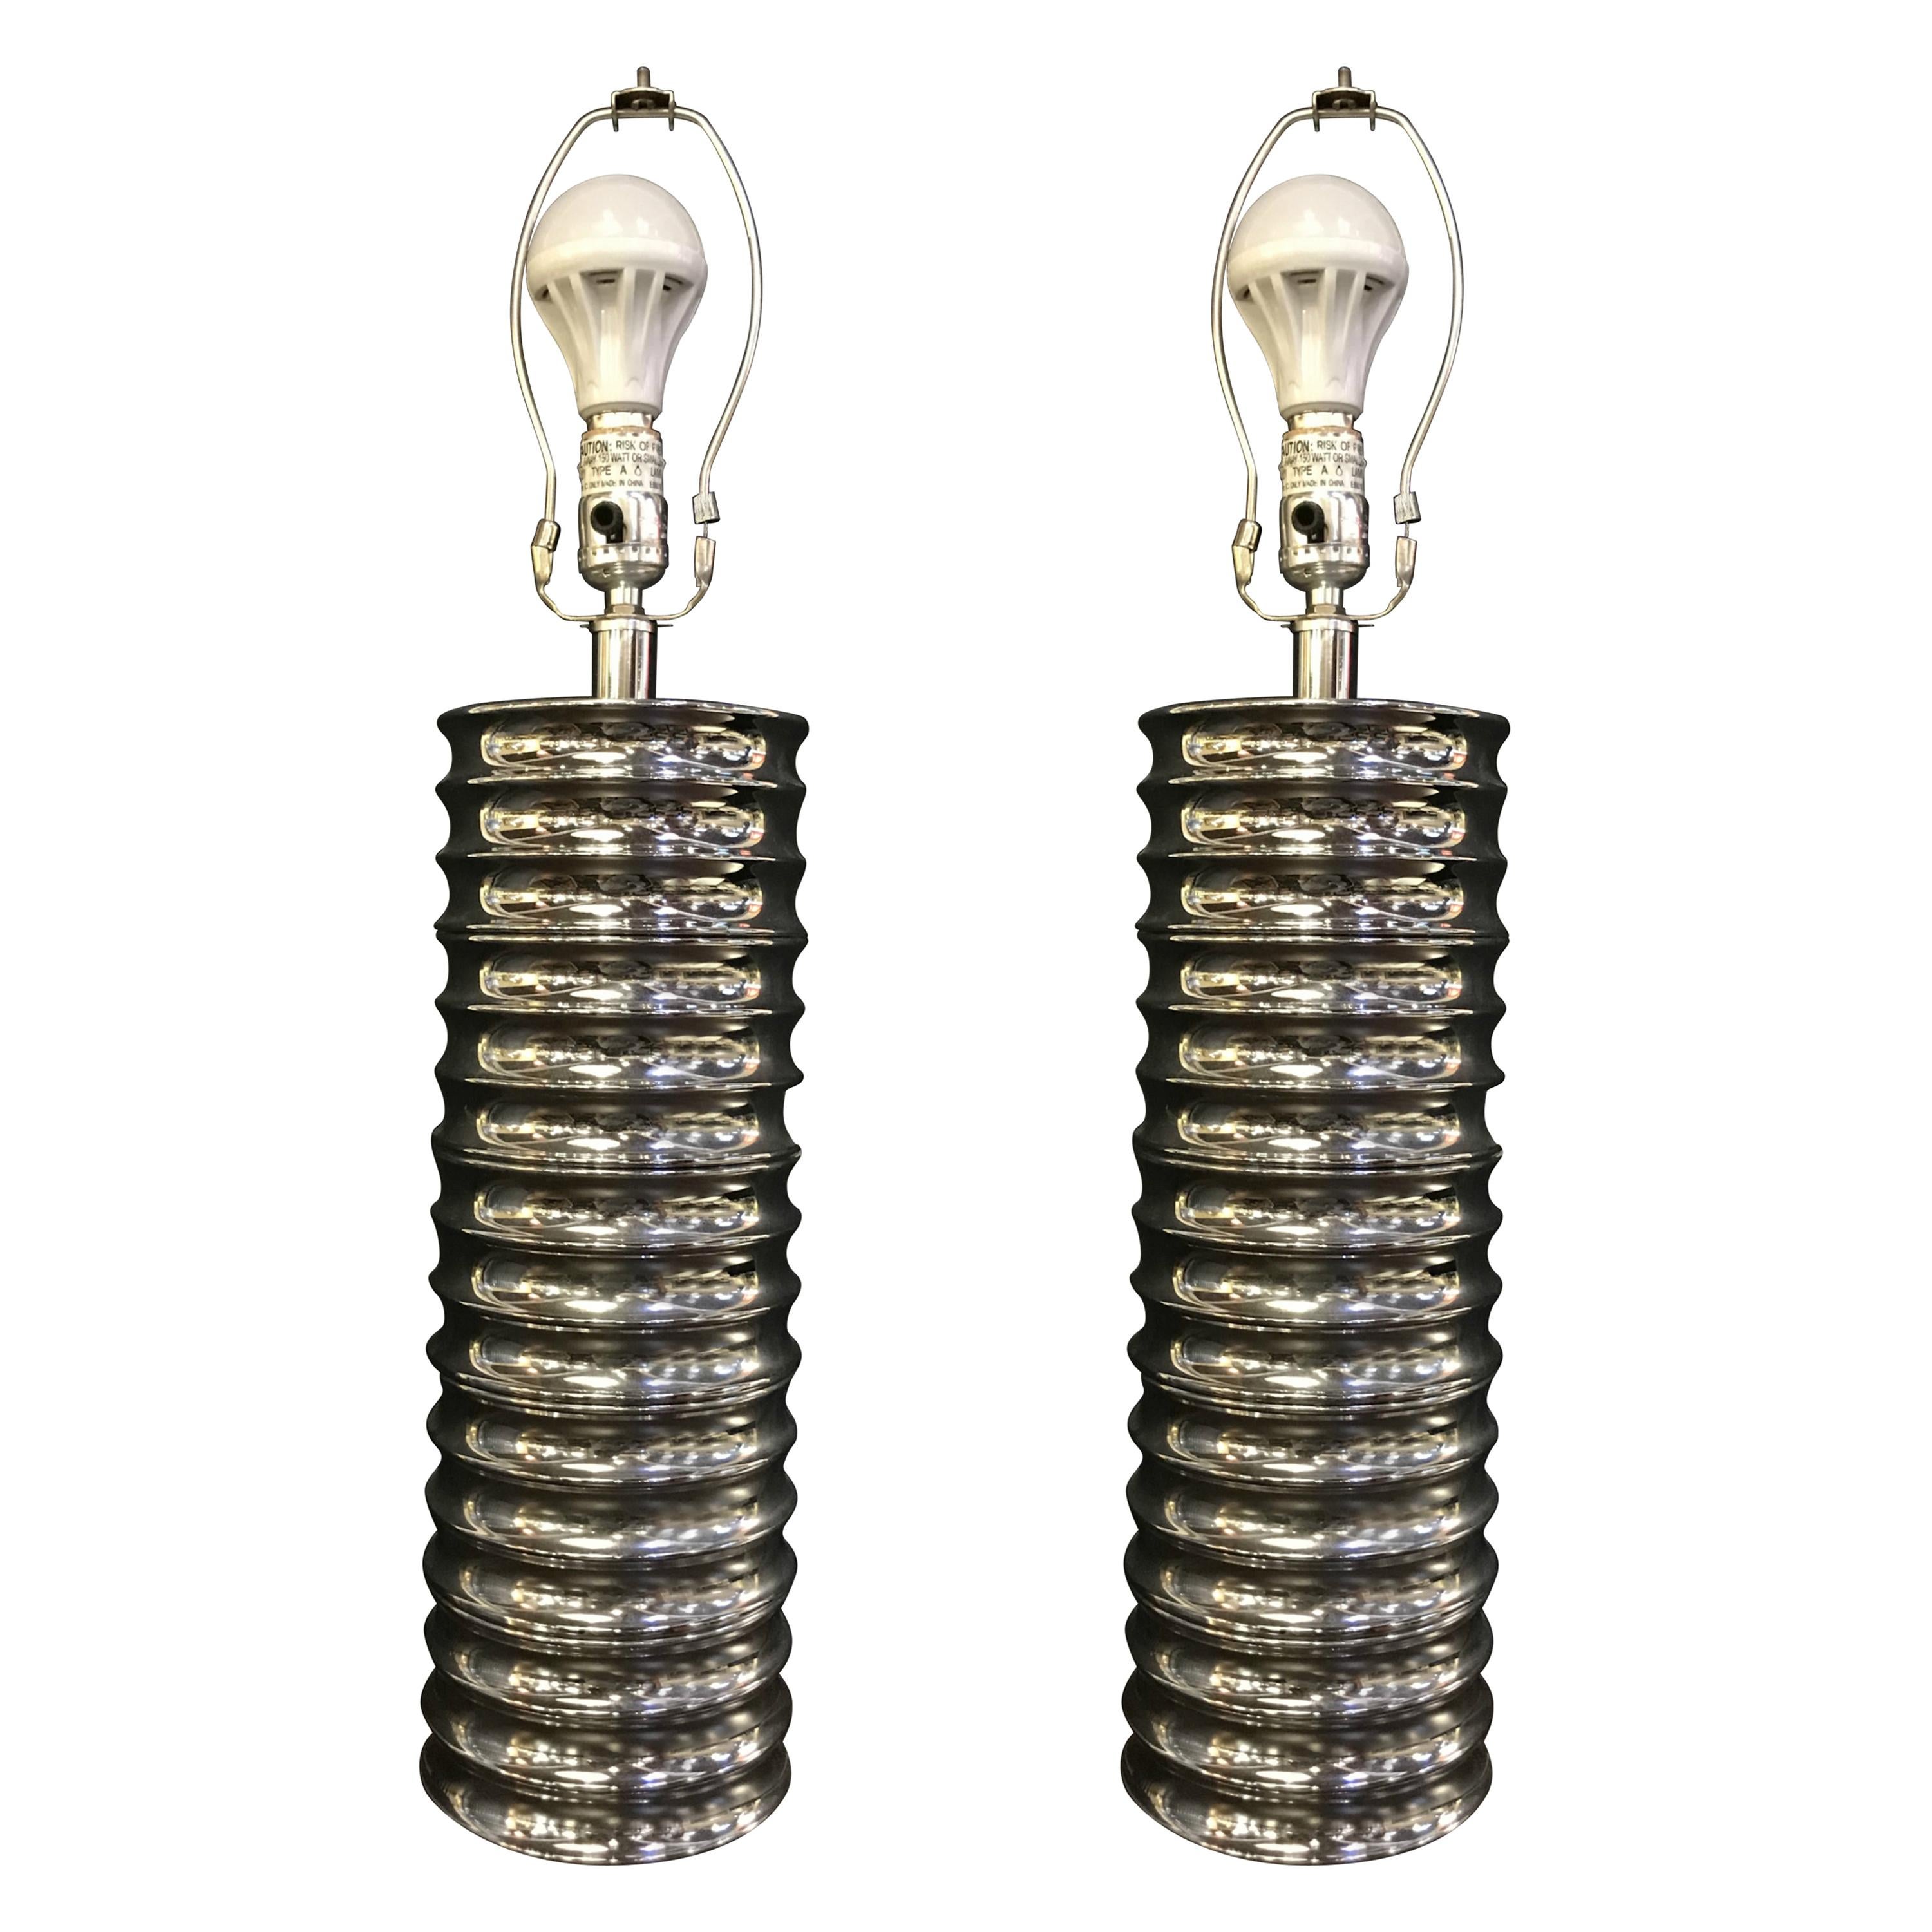 Pair of Hollywood Regency Style Silvered Mercury Glass Table Lamps